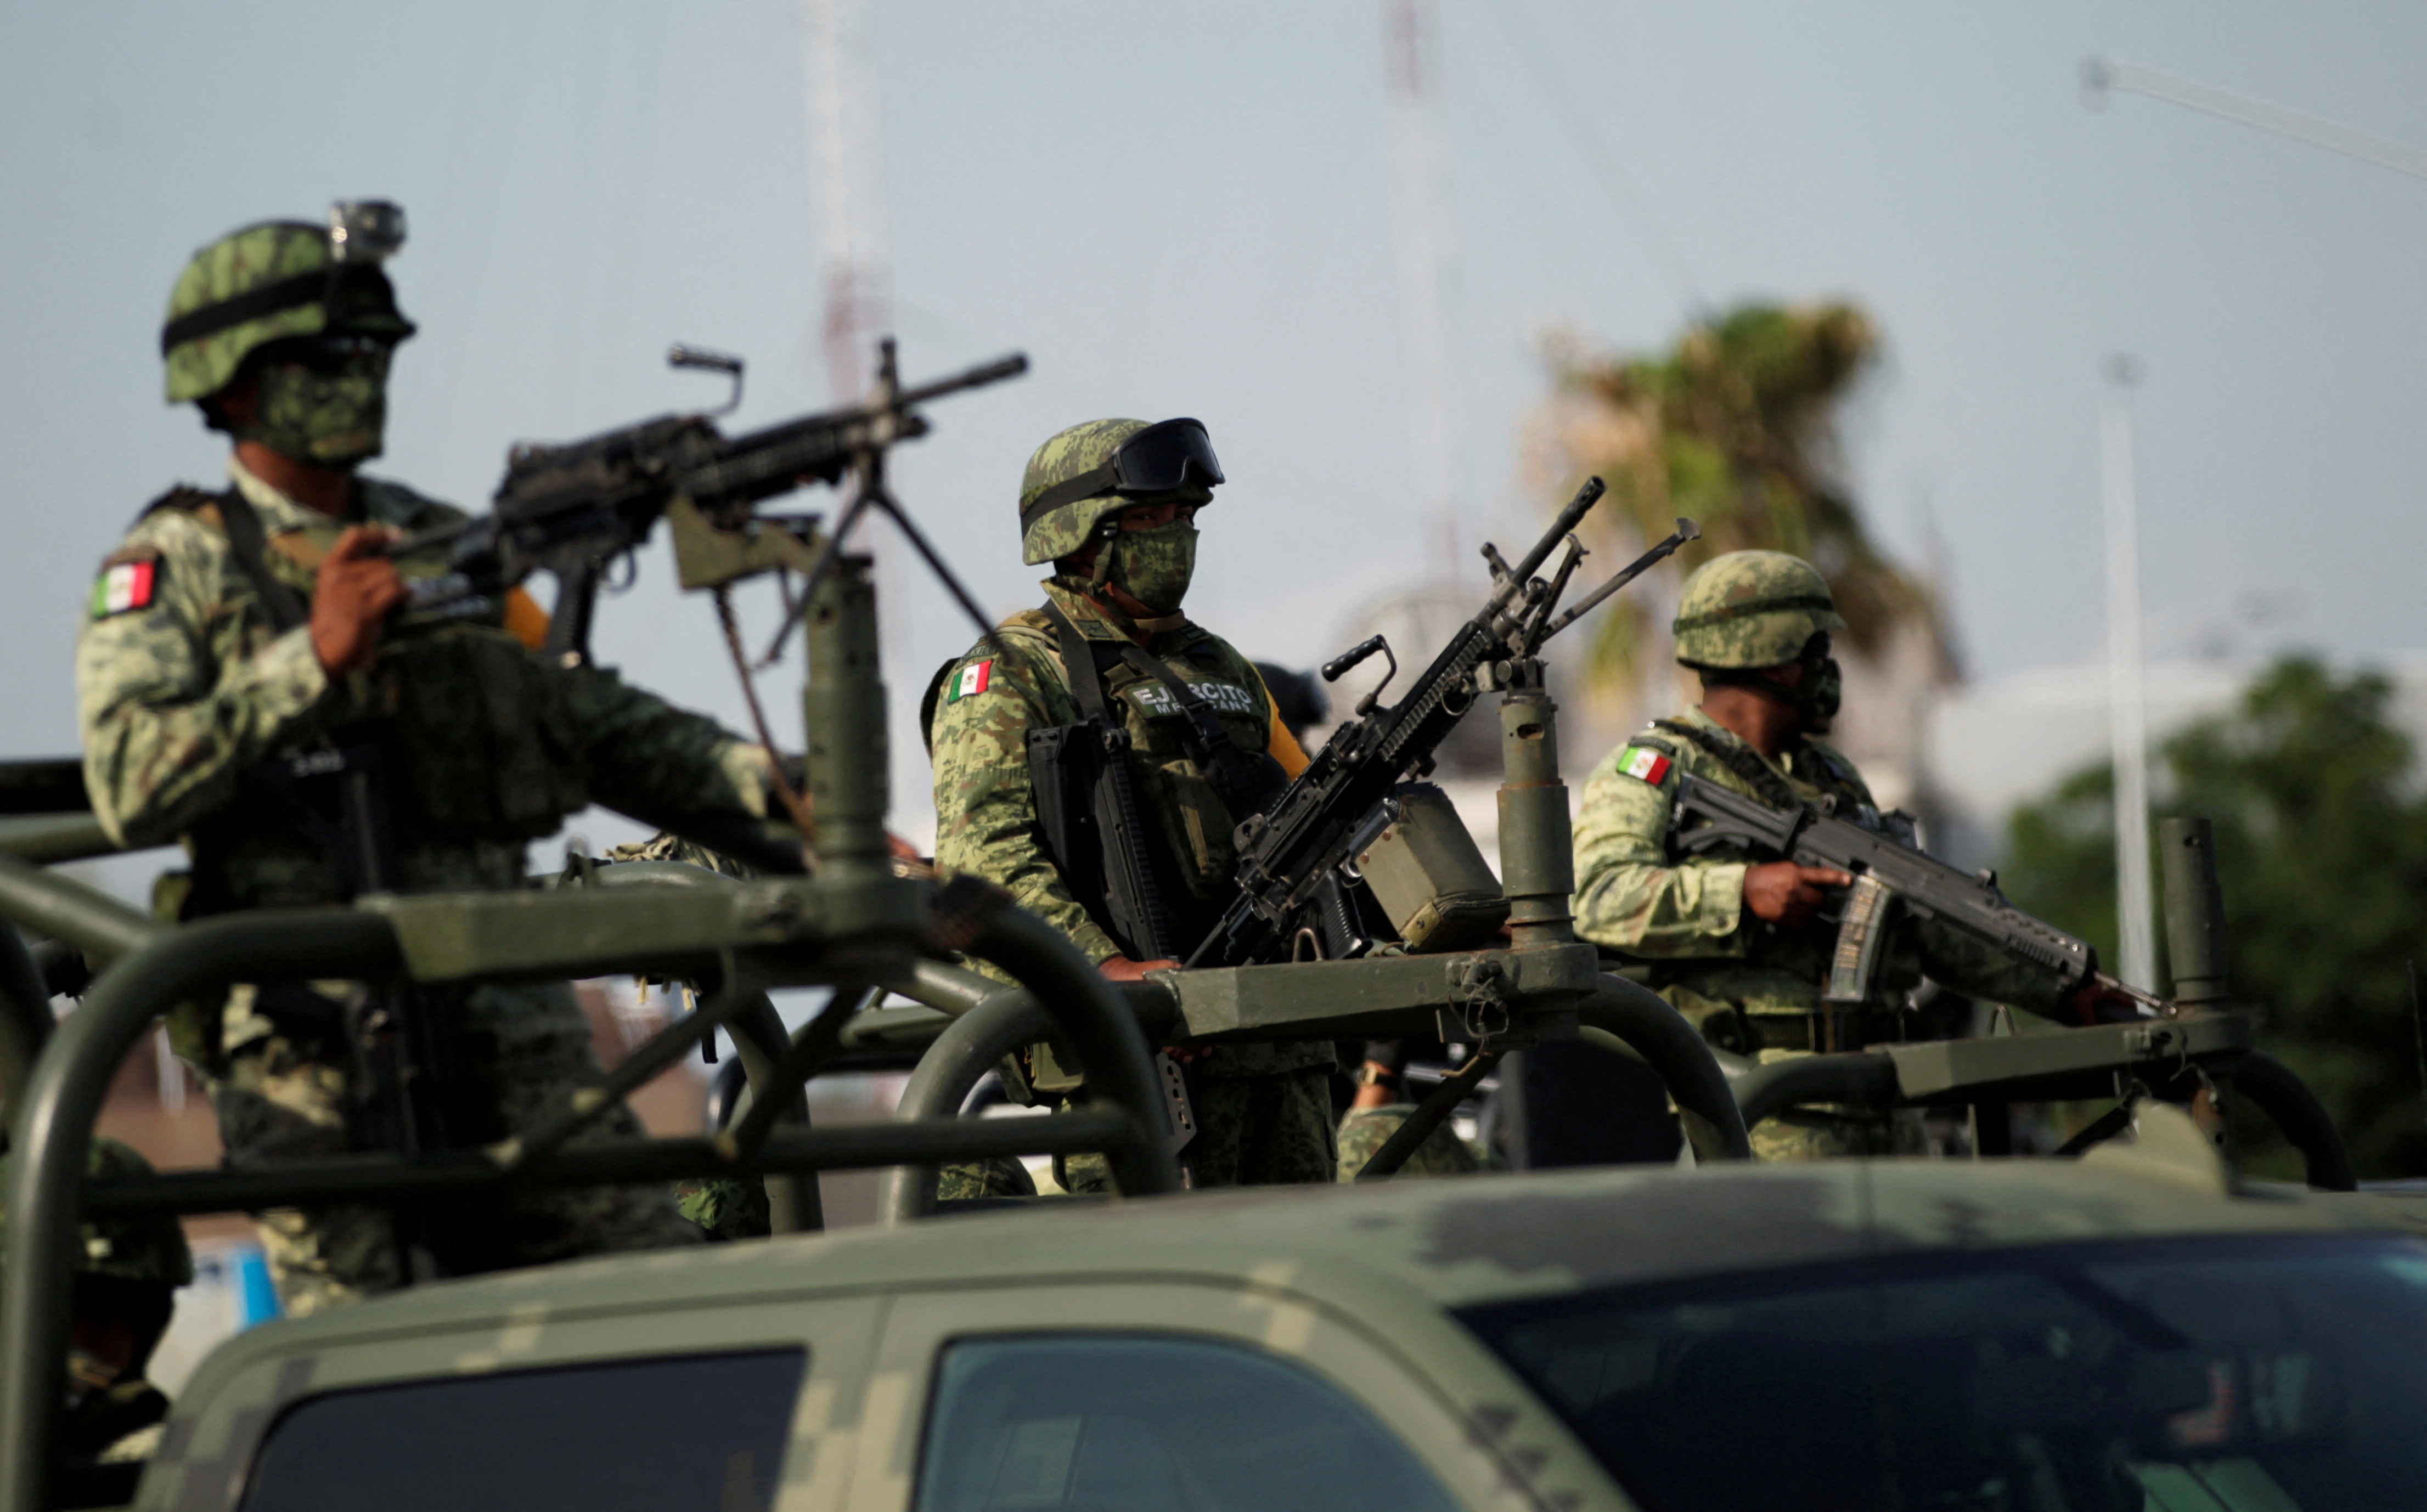 Soldiers, police officers and members of the National Guard the area during a security operation in Sabinas Hidalgo